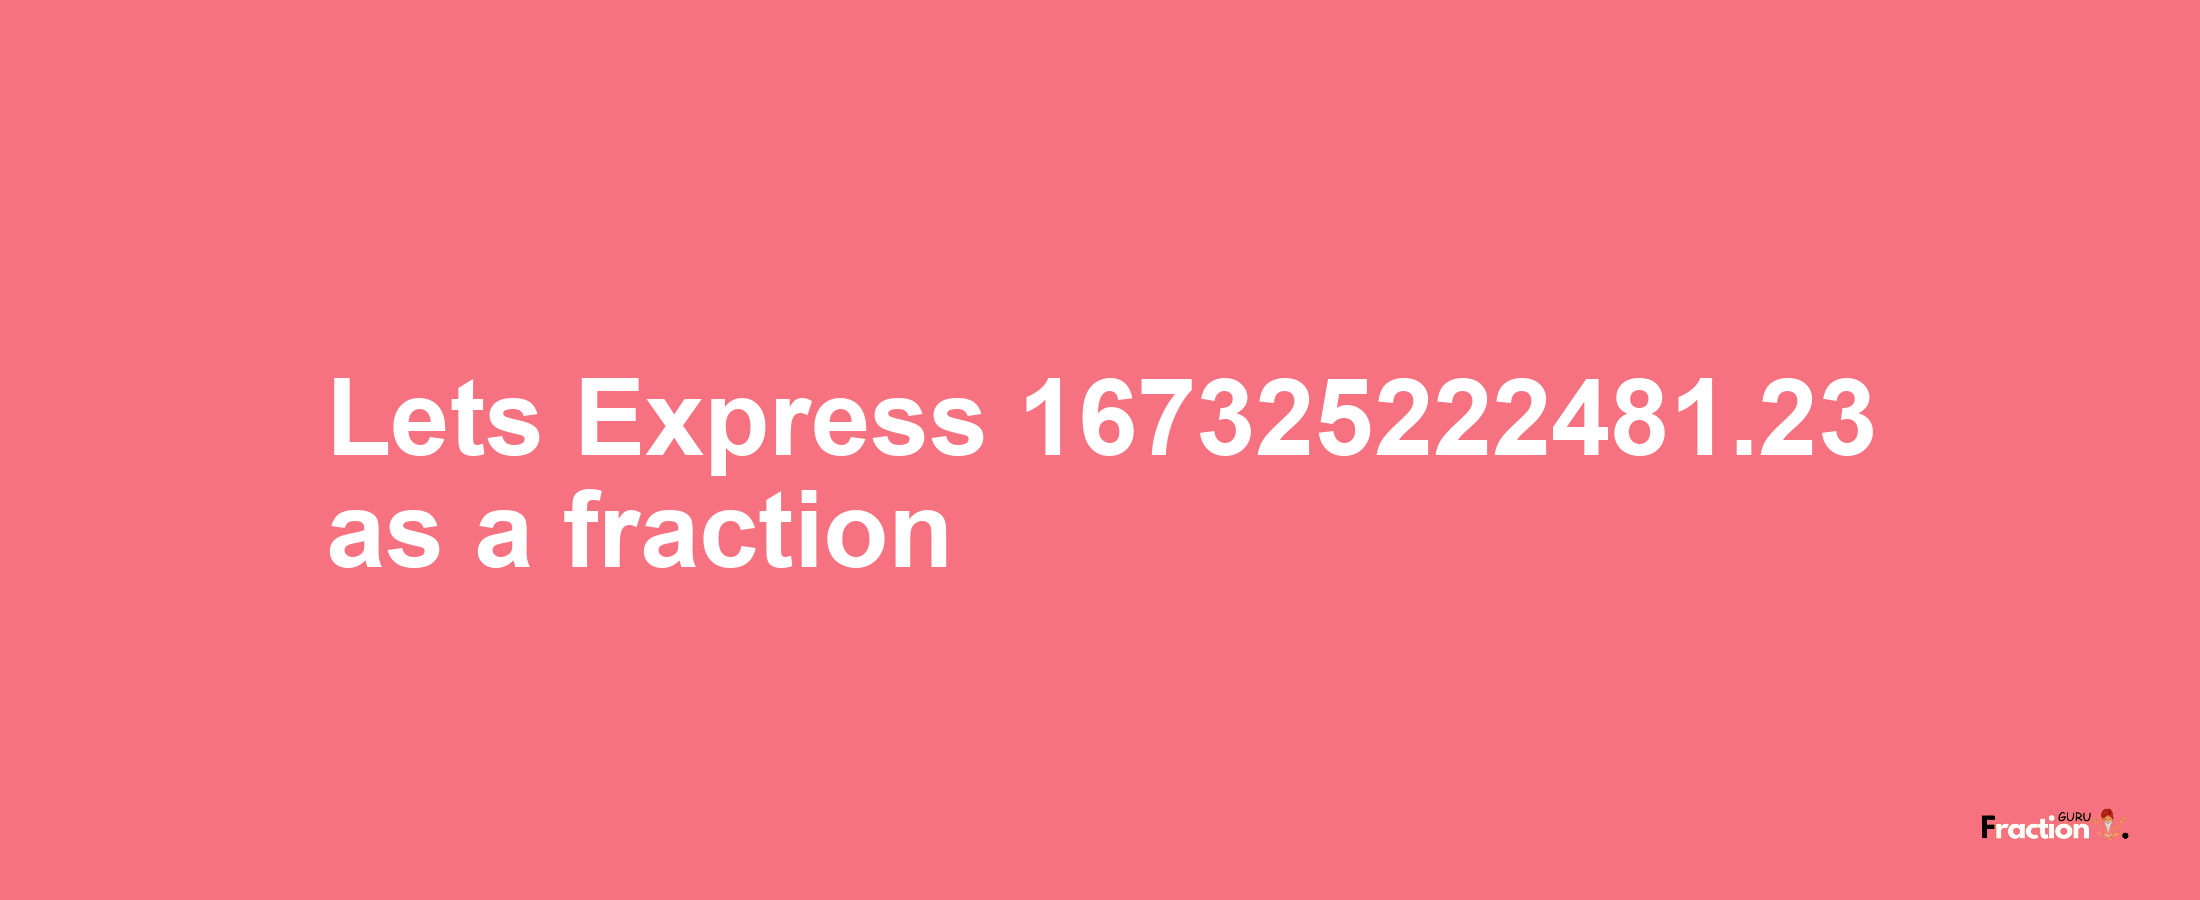 Lets Express 167325222481.23 as afraction